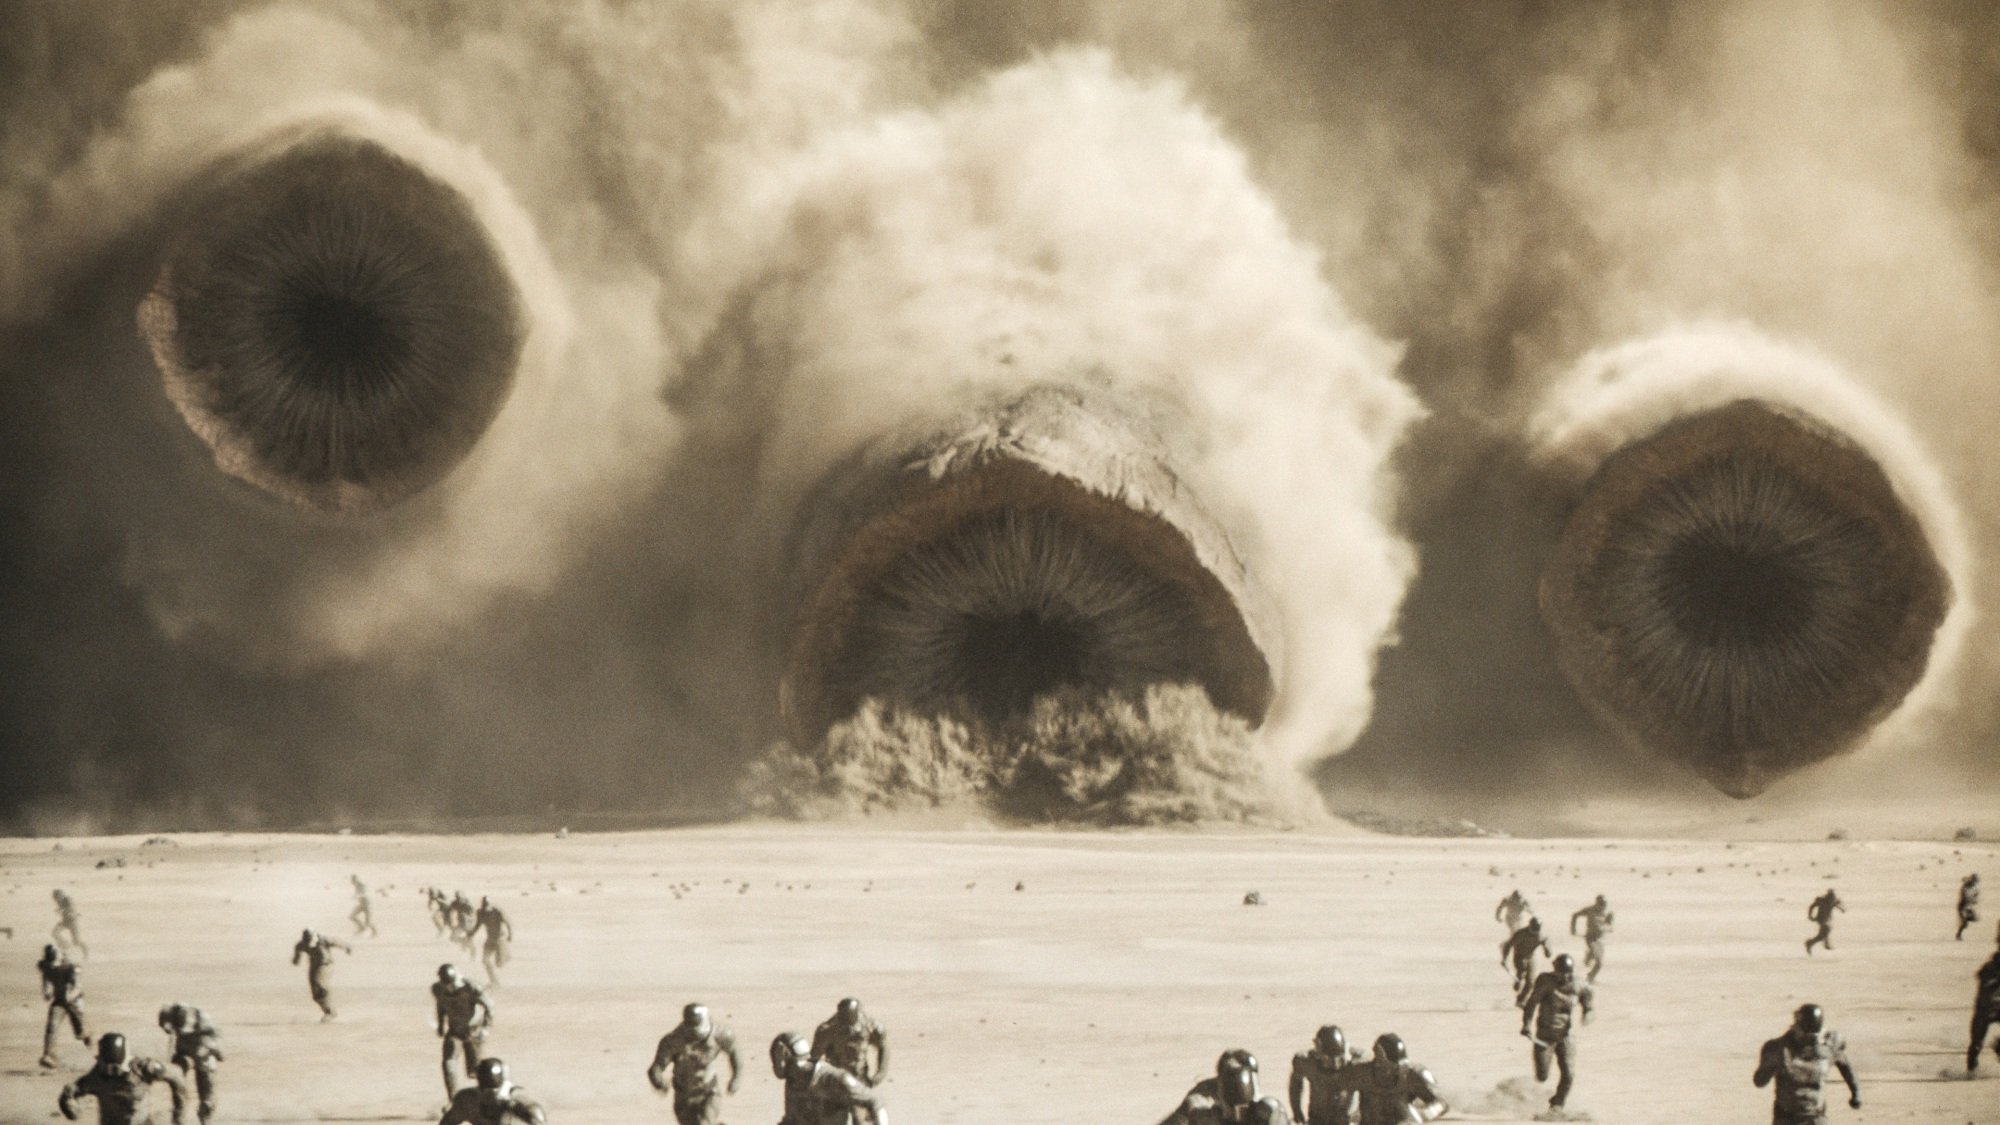 Three sandworms barrel towards an army of humans.